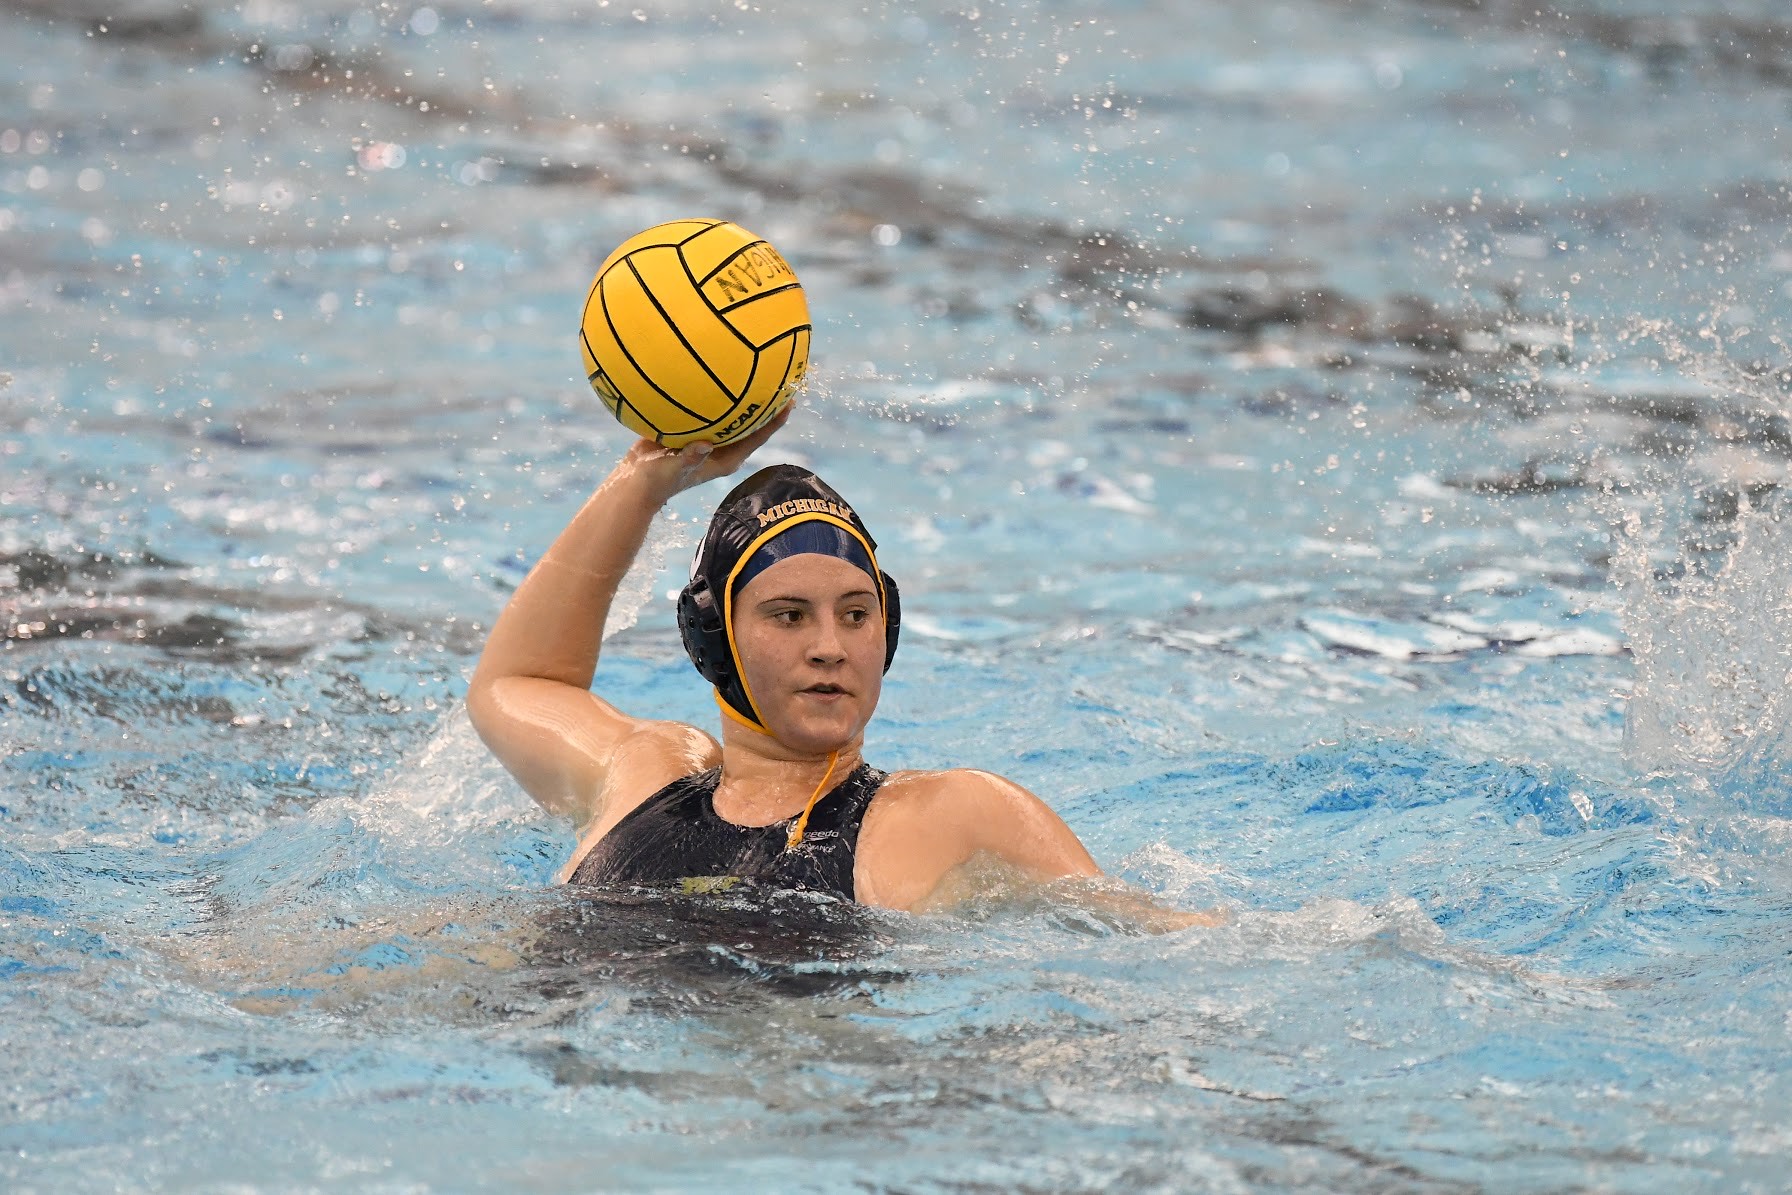 Kathy playing water polo